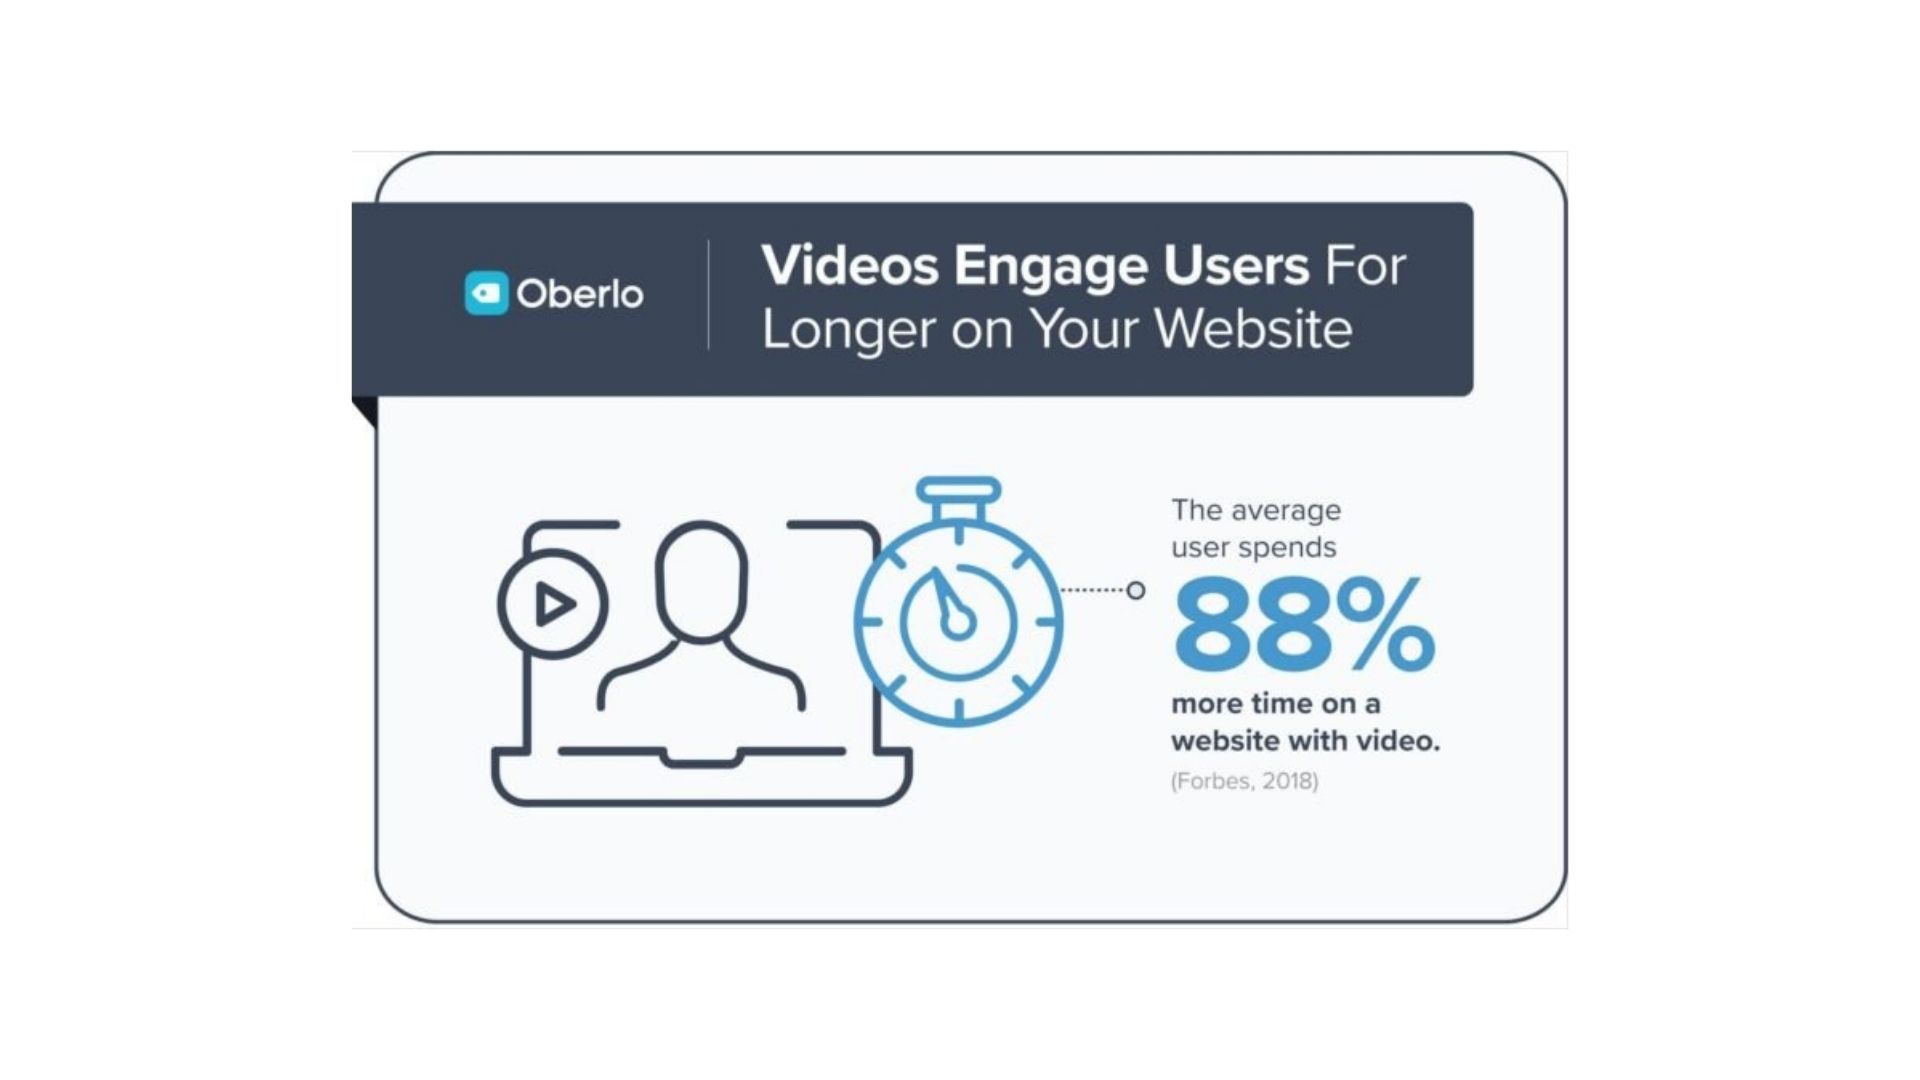 Videos engage users for longer on your website